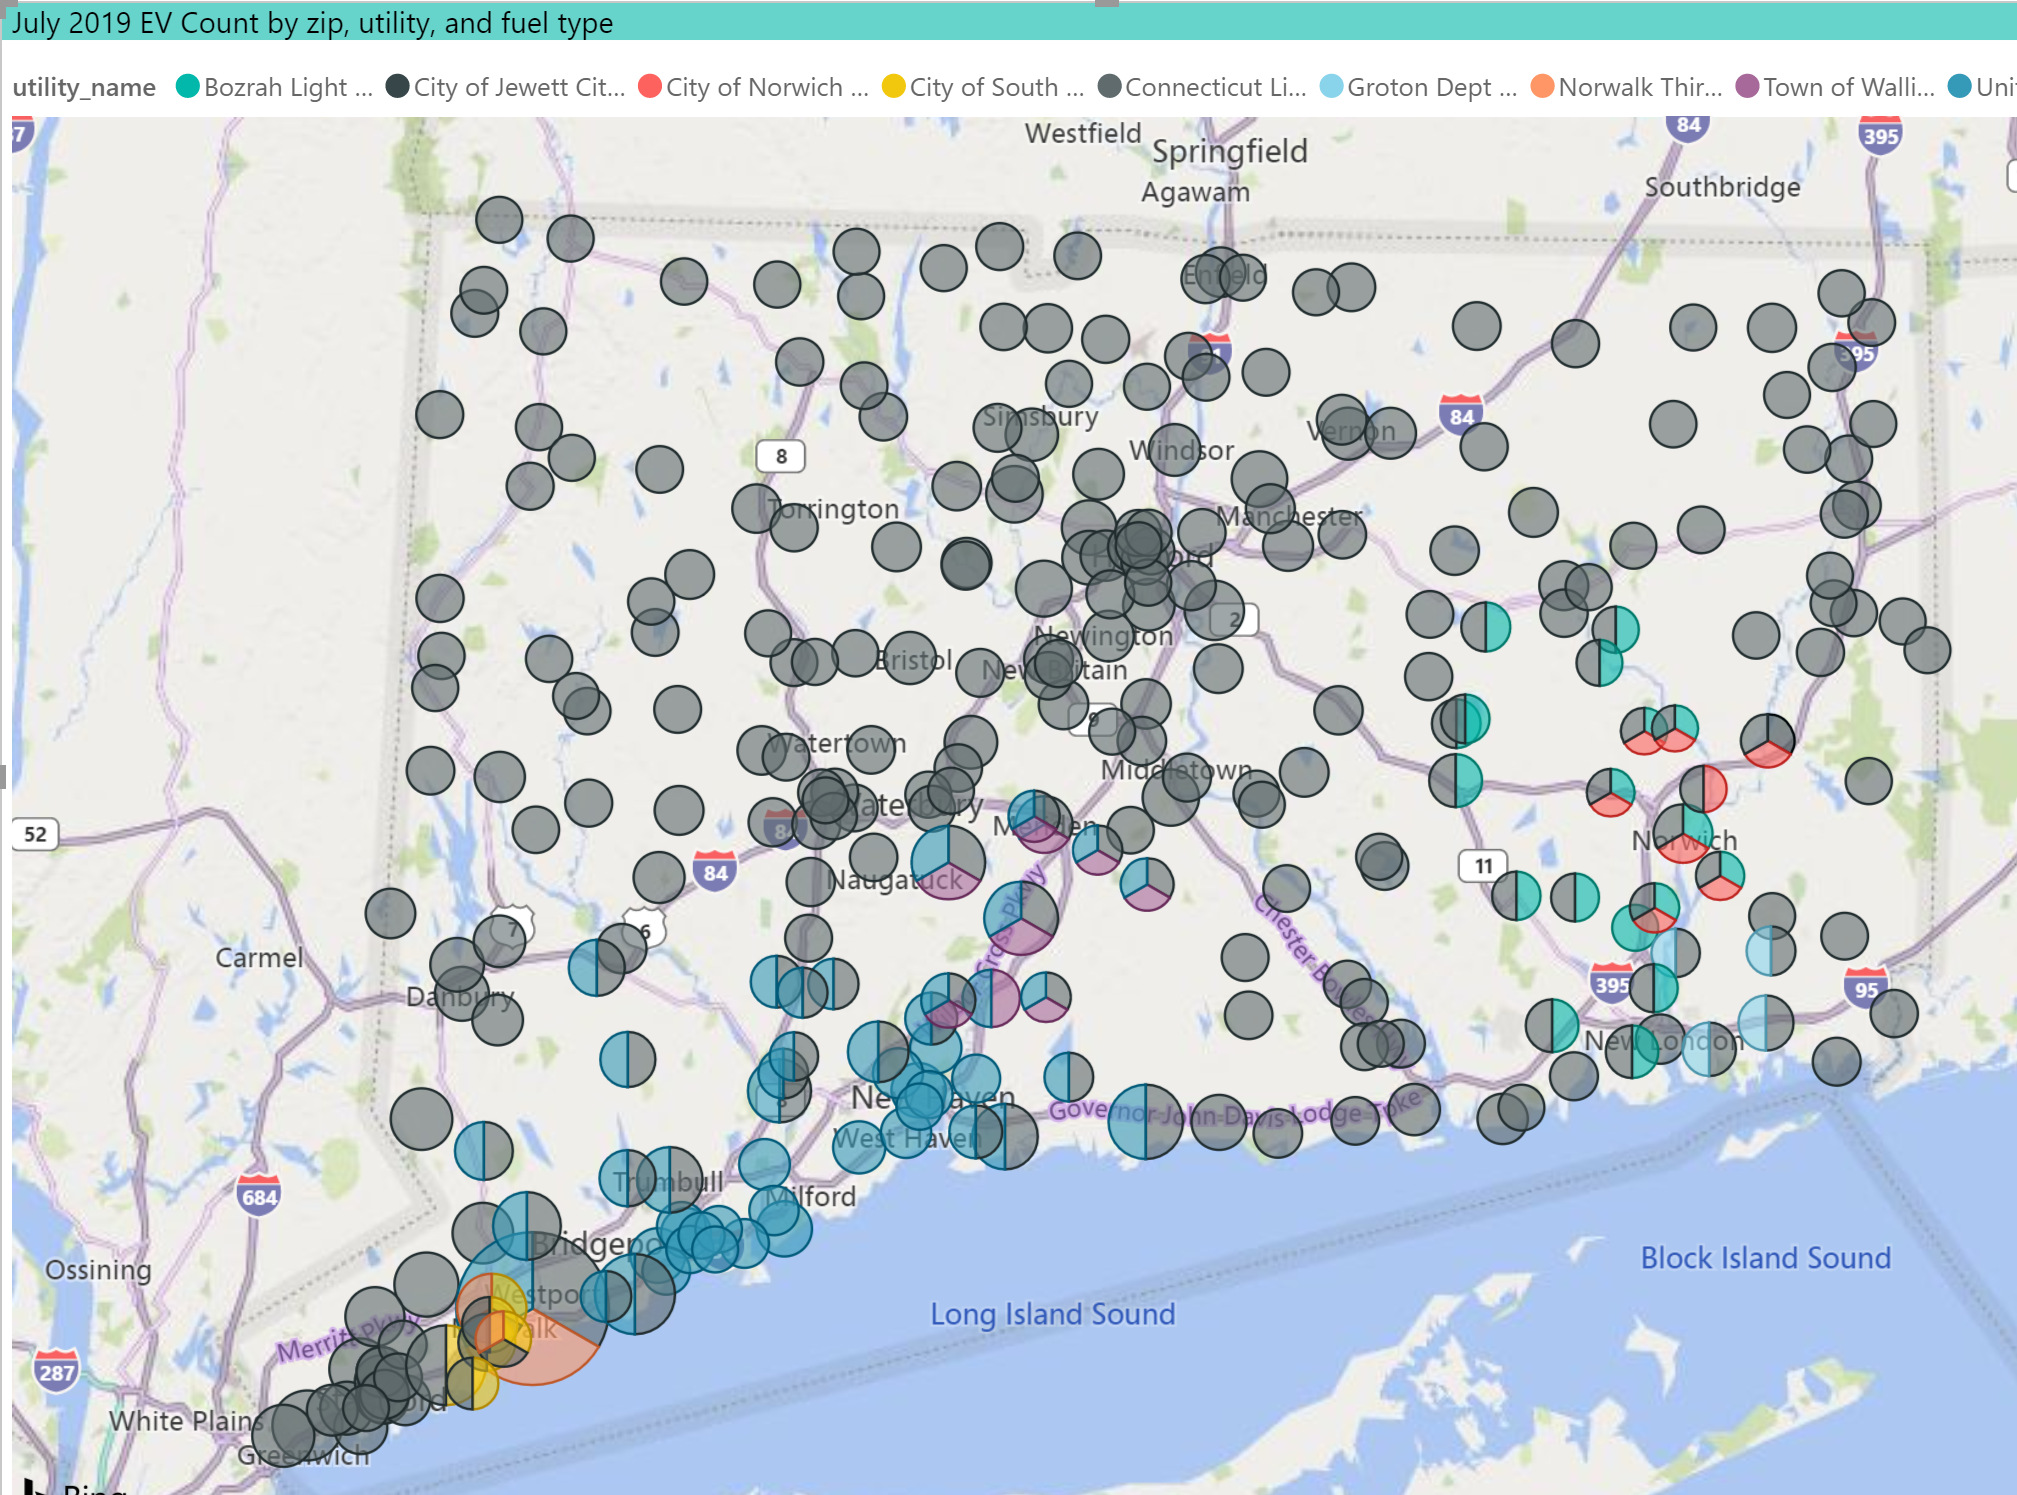 EVs in CT by zip code by utility